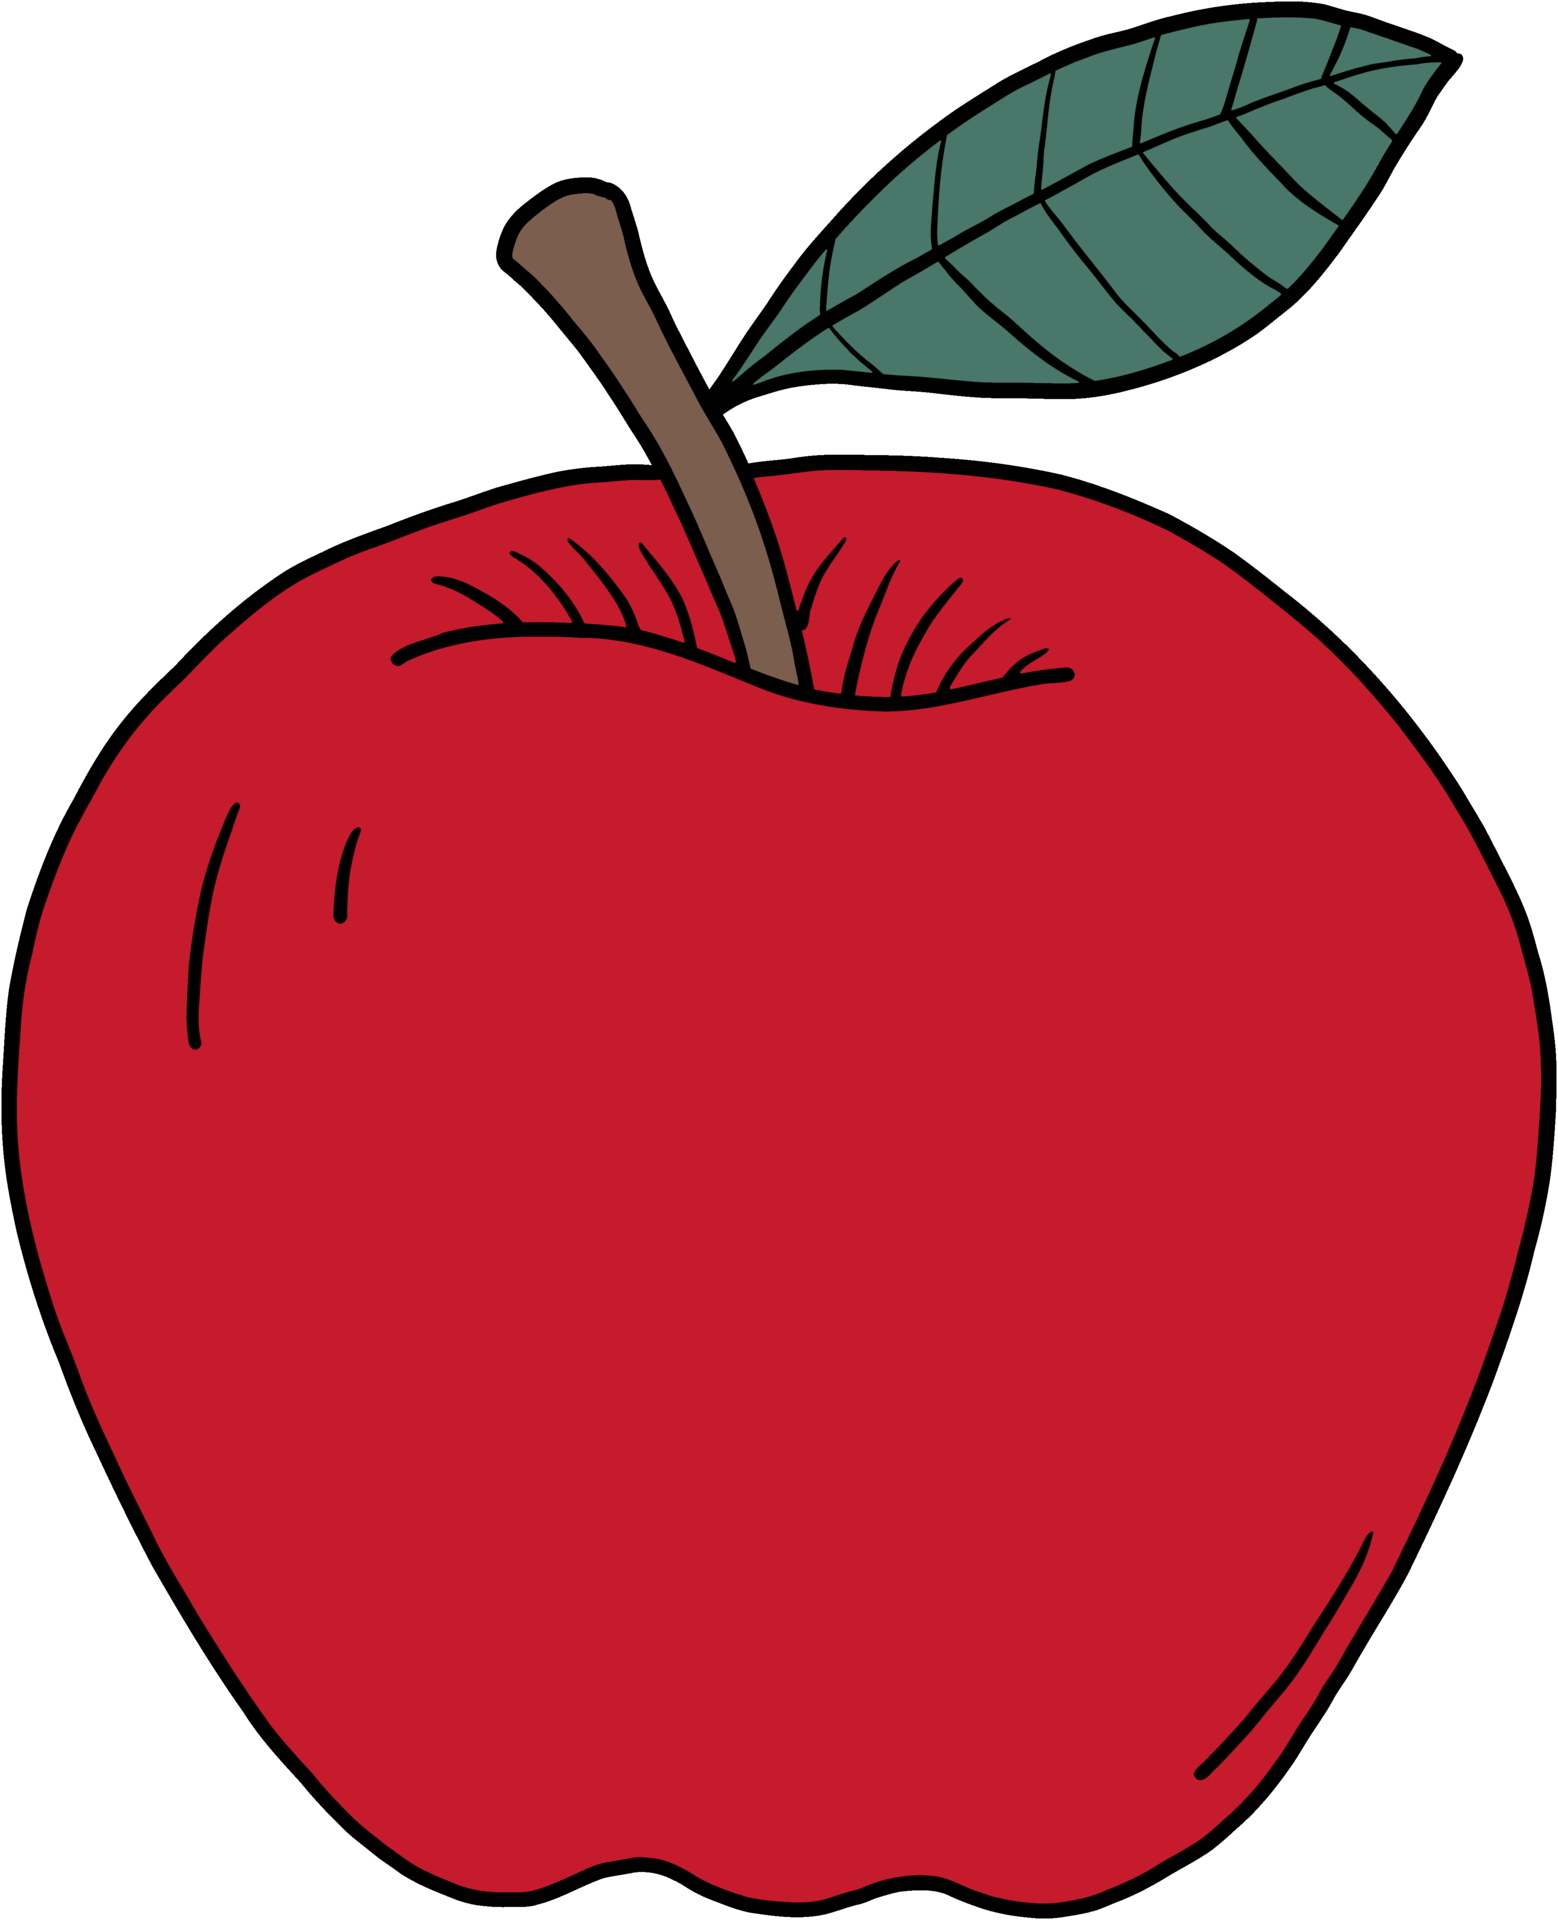 doodle freehand sketch drawing of apple fruit. 11153295 PNG